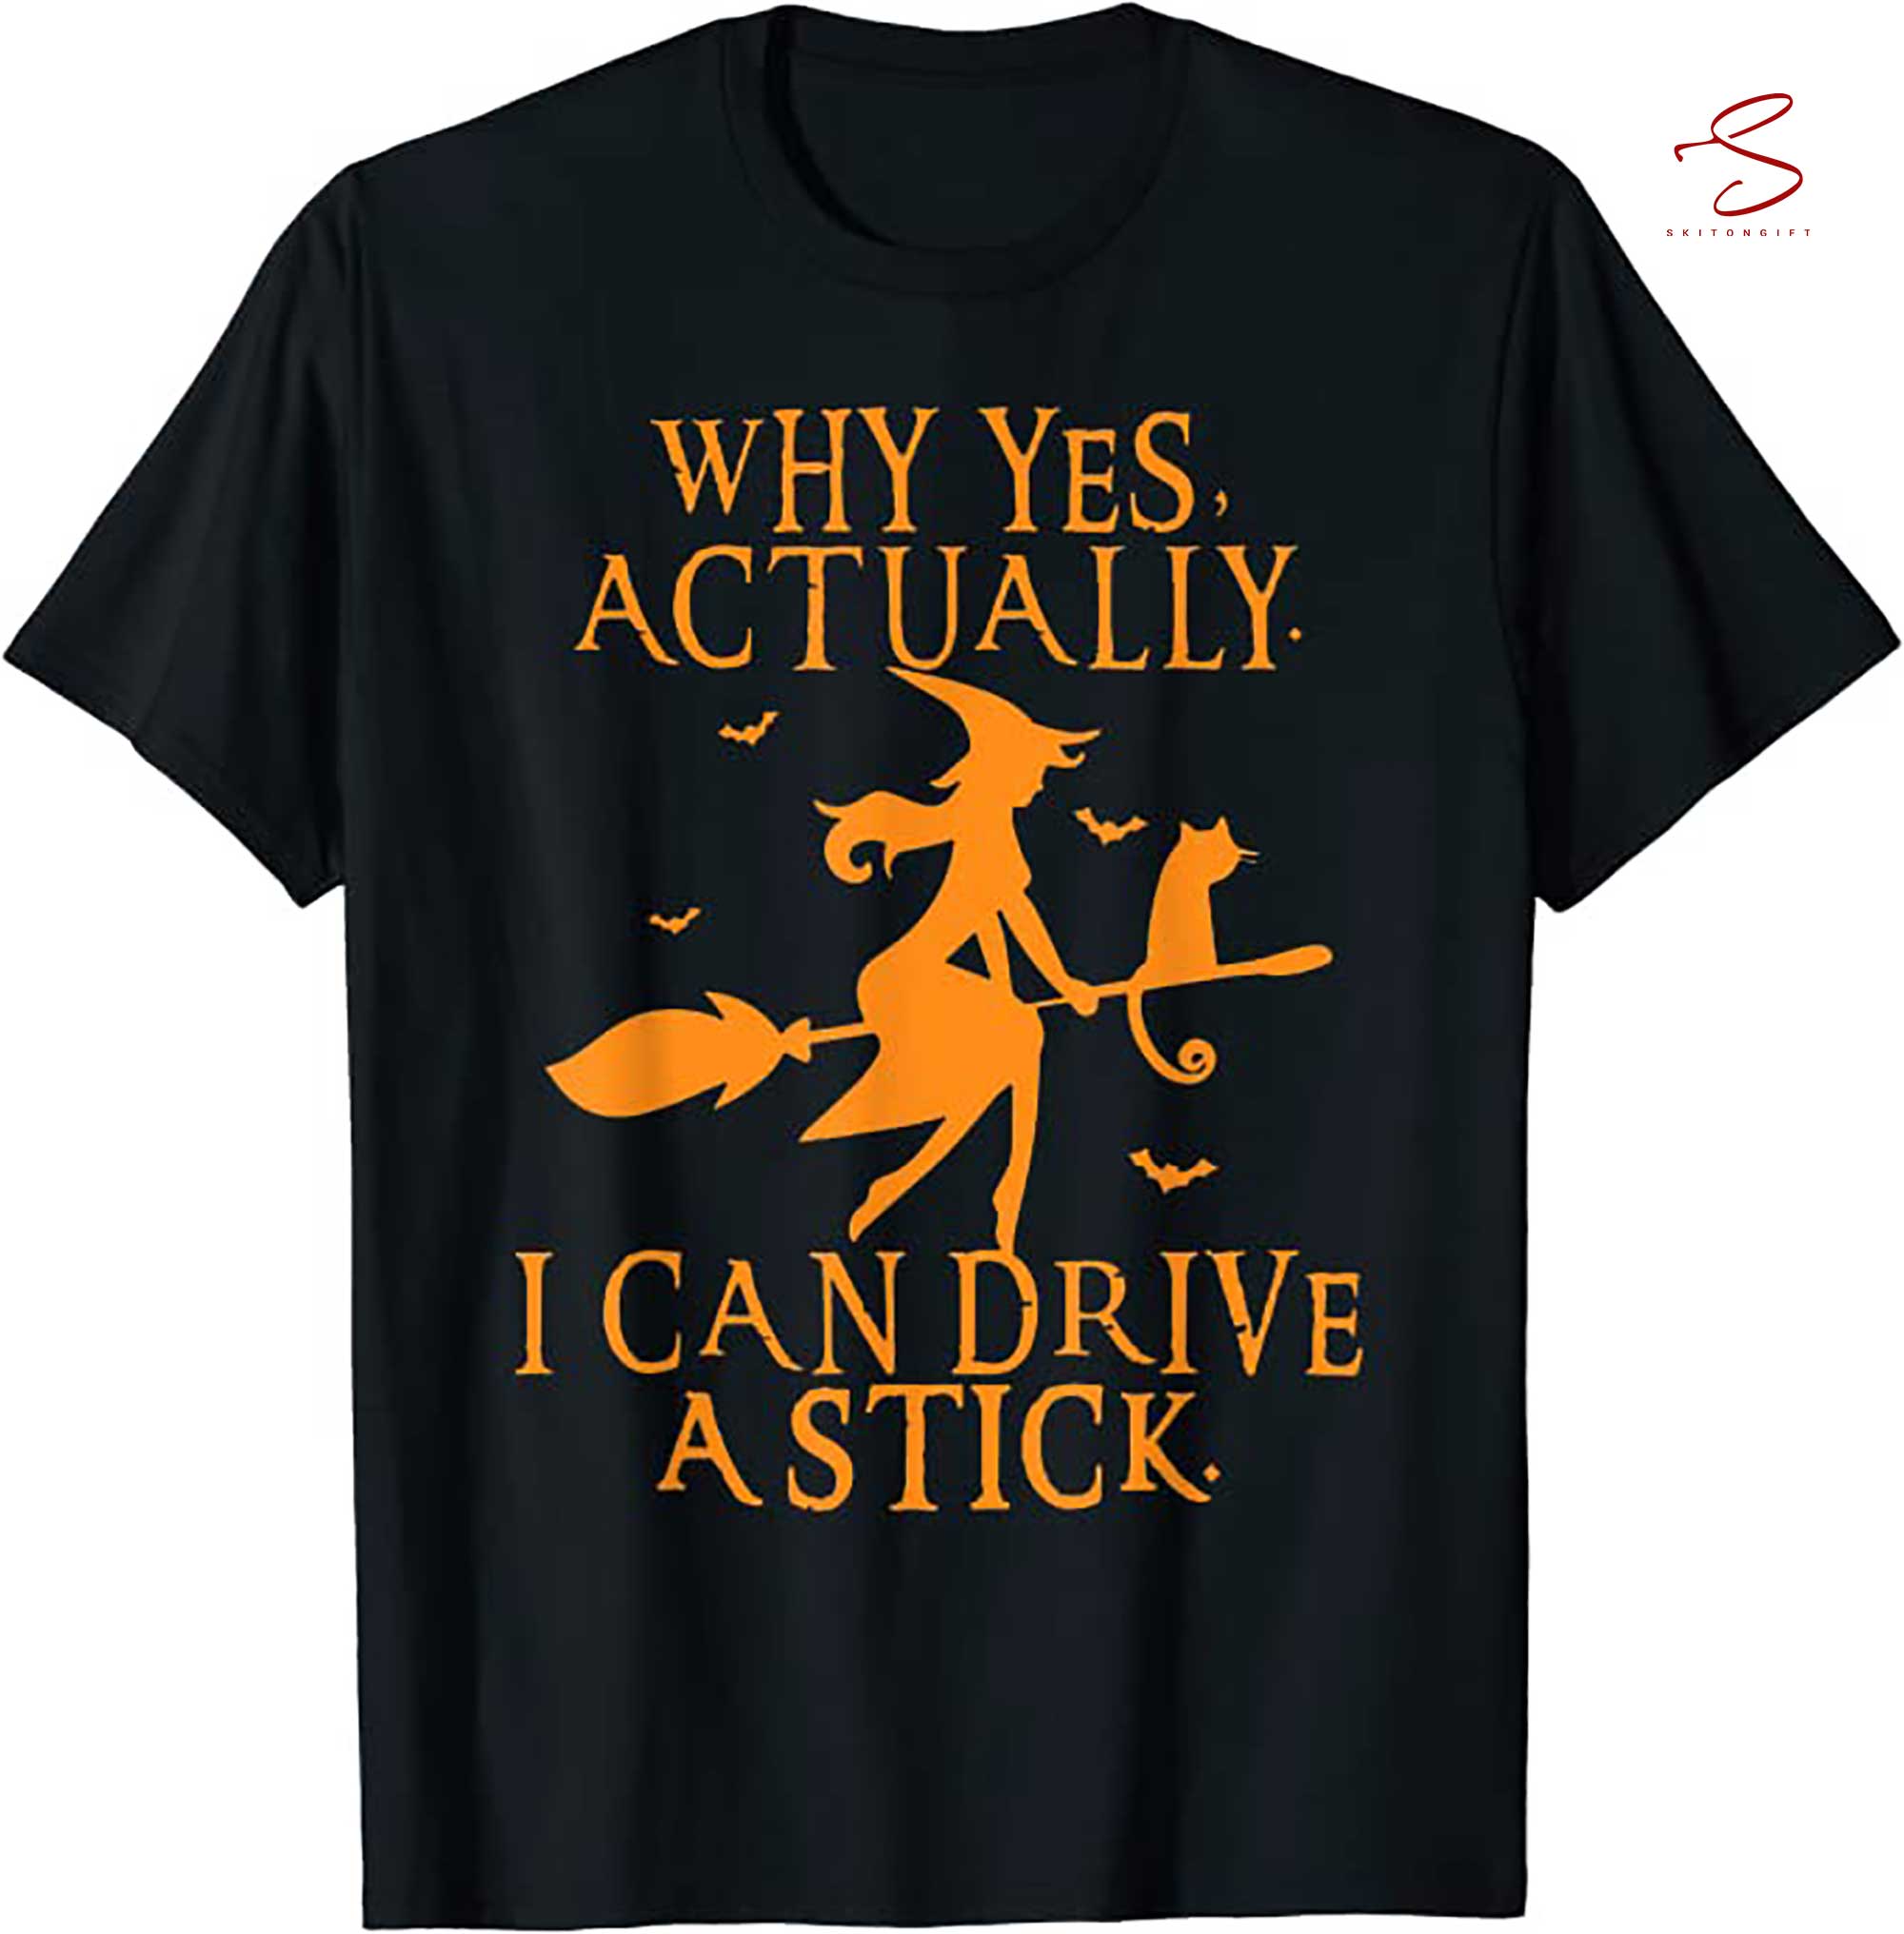 Skitongift Why Yes Actually I Can Drive A Stick Halloween T Shirt Funny Shirts Hoodie Long Short Sleeve Casual Shirt